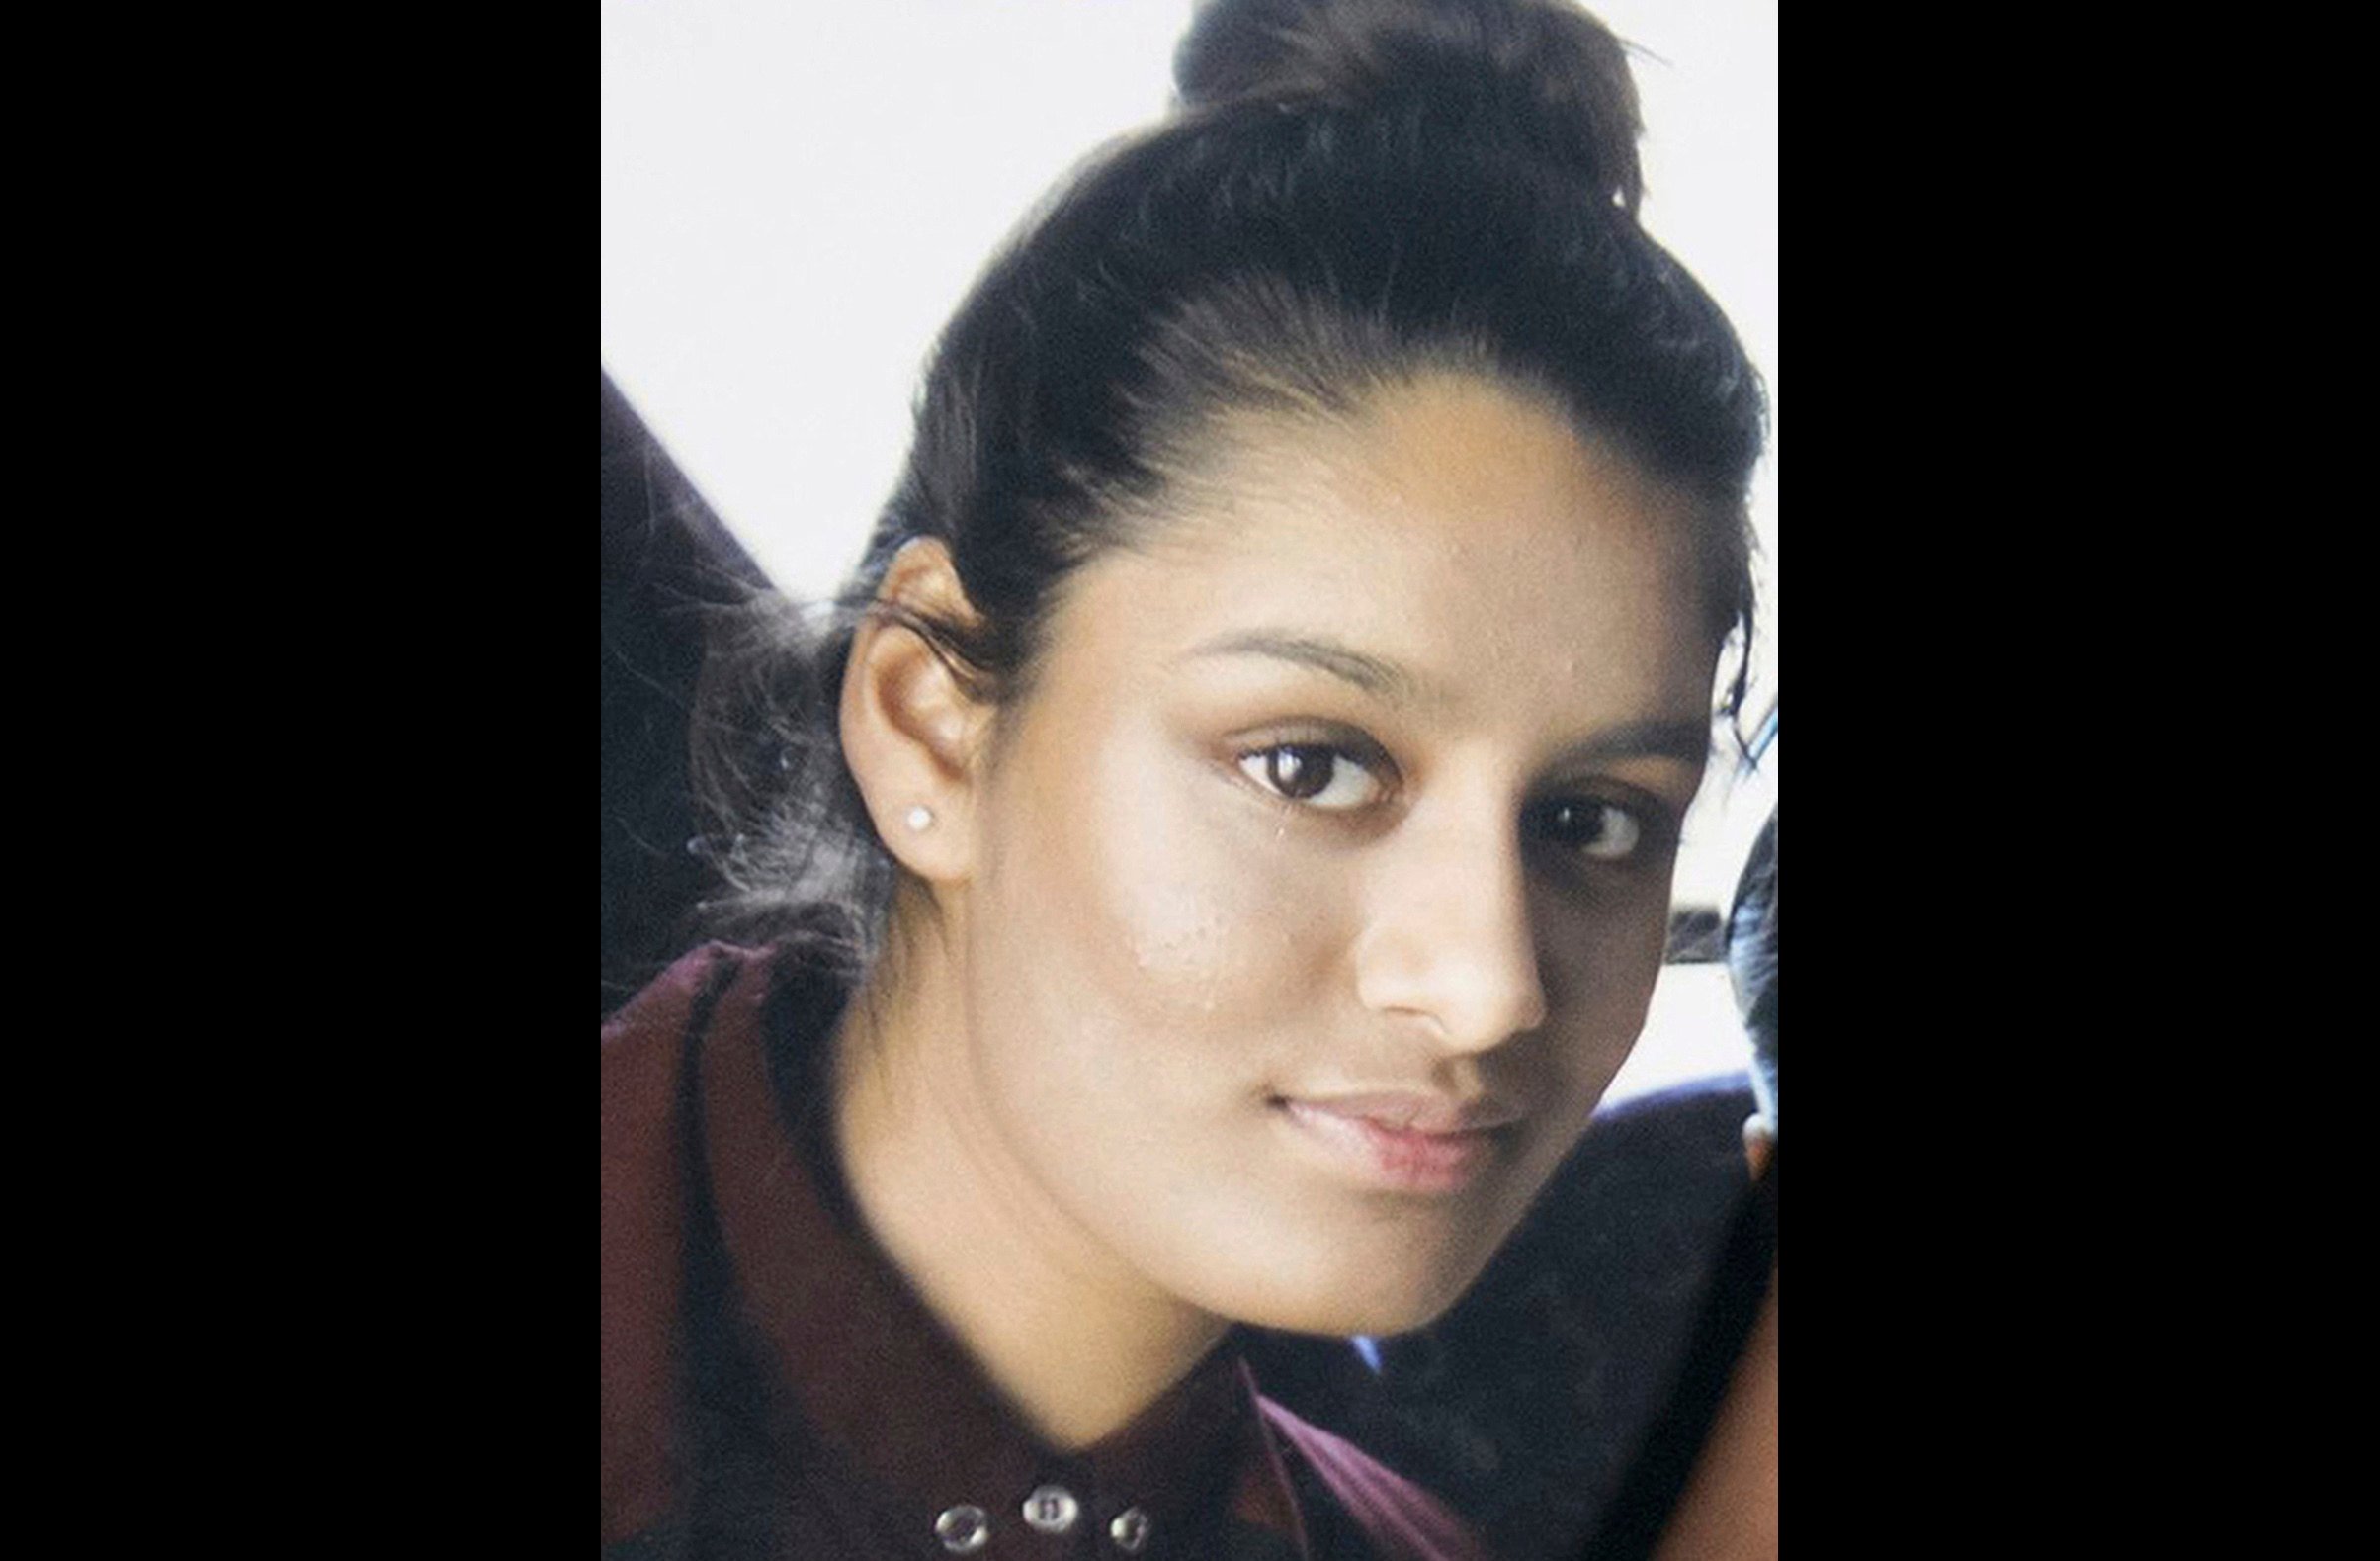 A photo of Shamima Begum, who travelled to Syria as a teenager to join the Islamic State group, lost her appeal against the British government’s decision to revoke her U.K. citizenship. Photo: AP